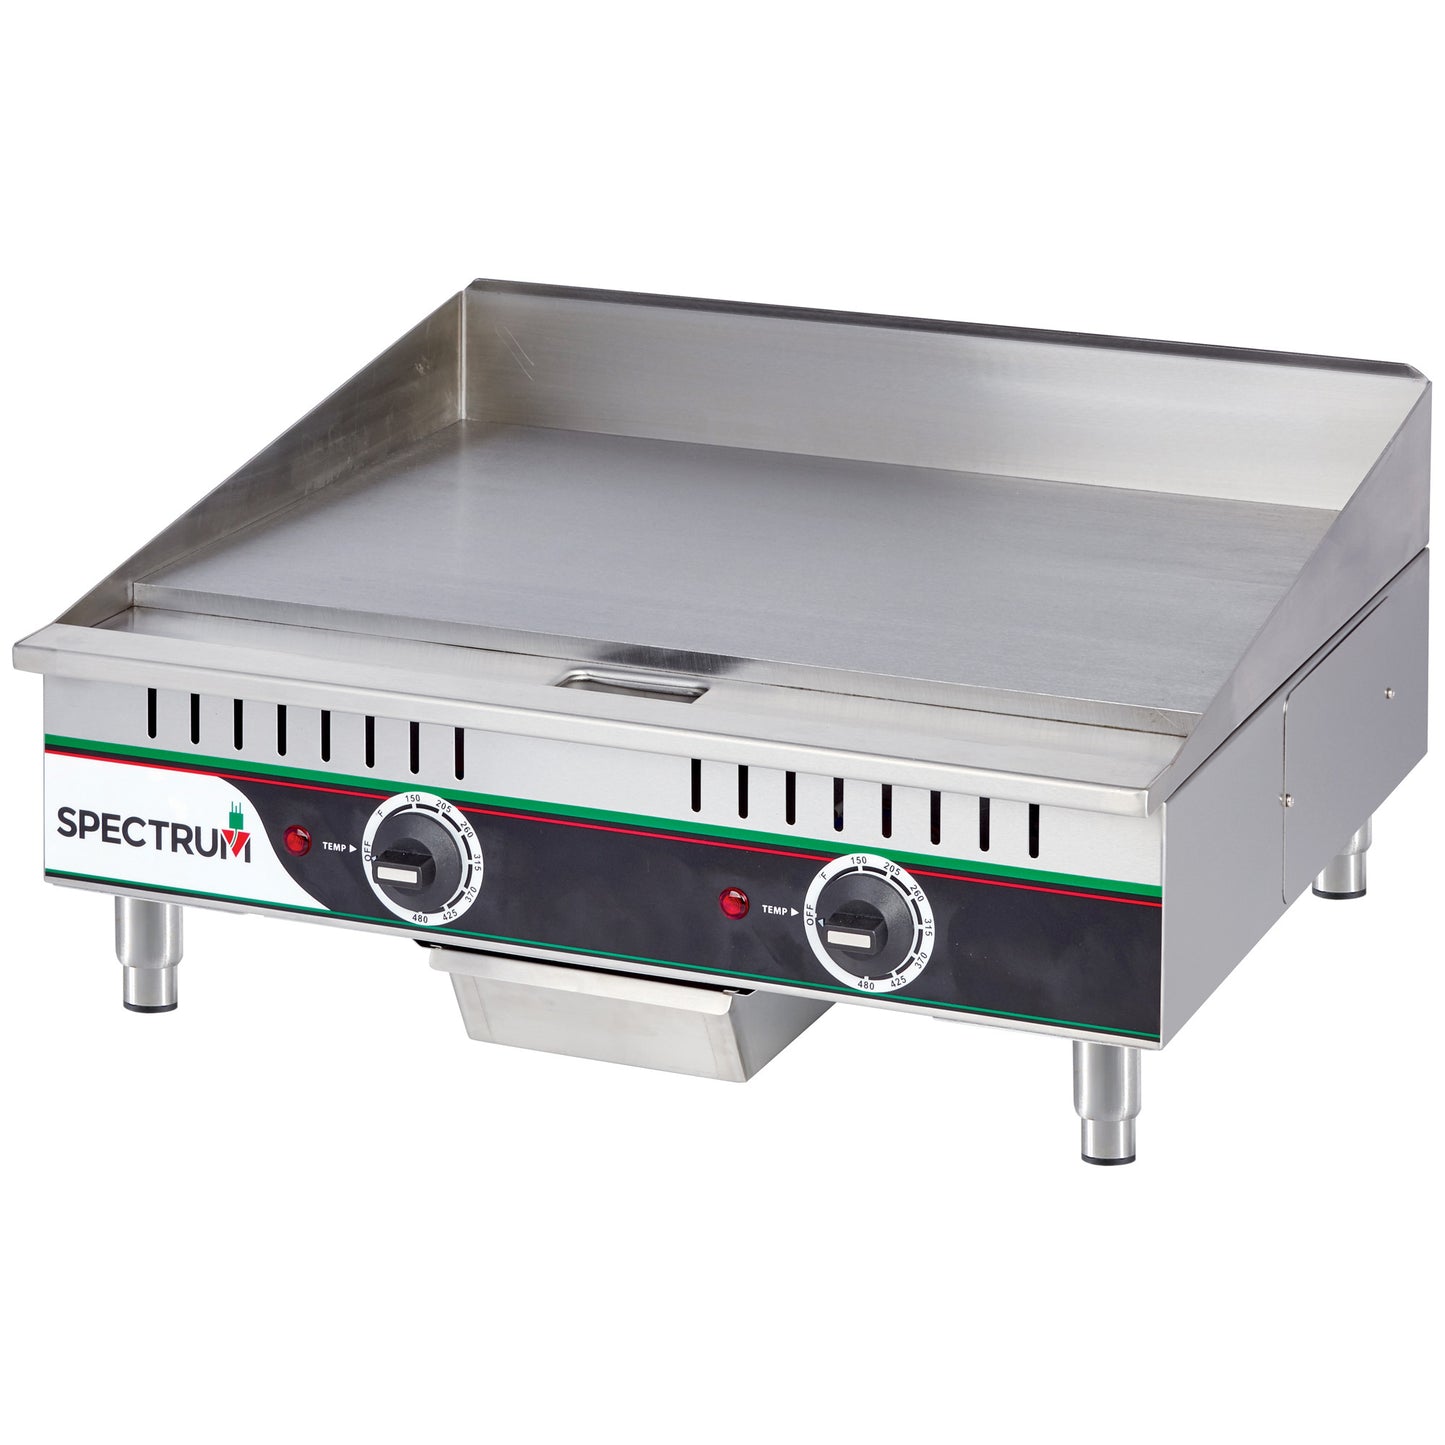 Spectrum 24" Electric Griddle, Two Heat Zones